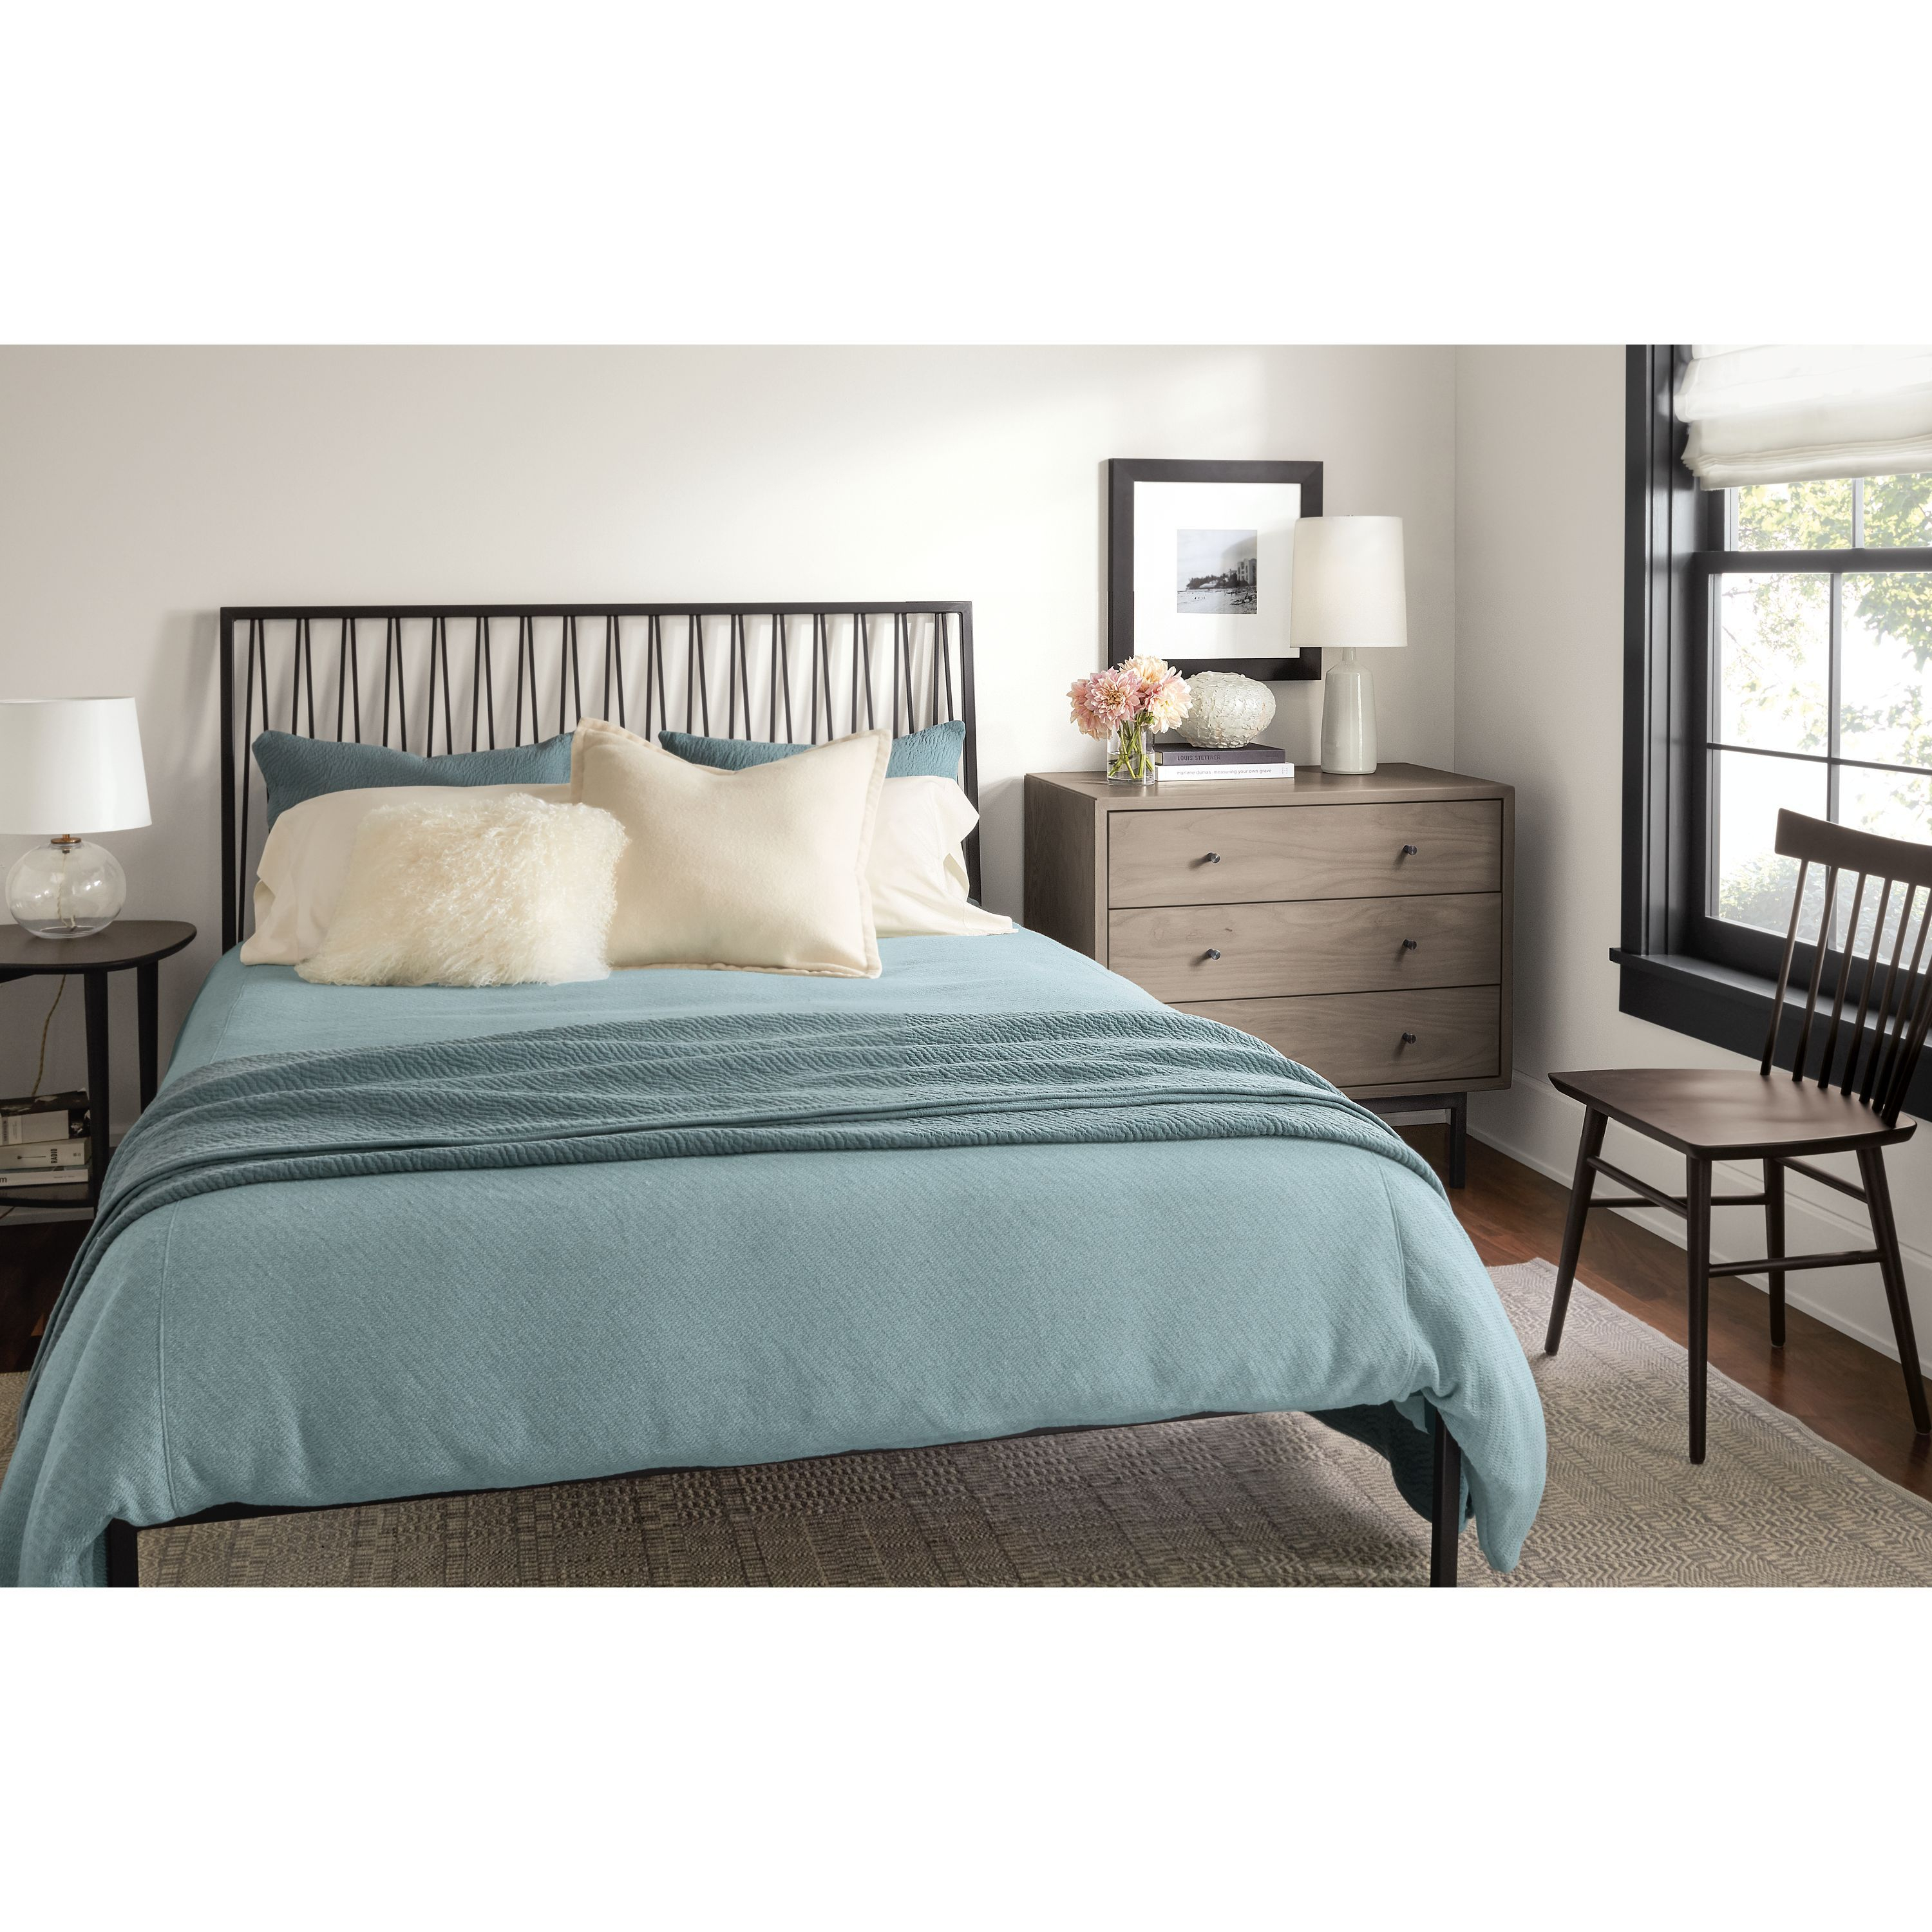 Thea Coverlet Shams Products Modern Bedroom Furniture Steel for dimensions 3000 X 3000